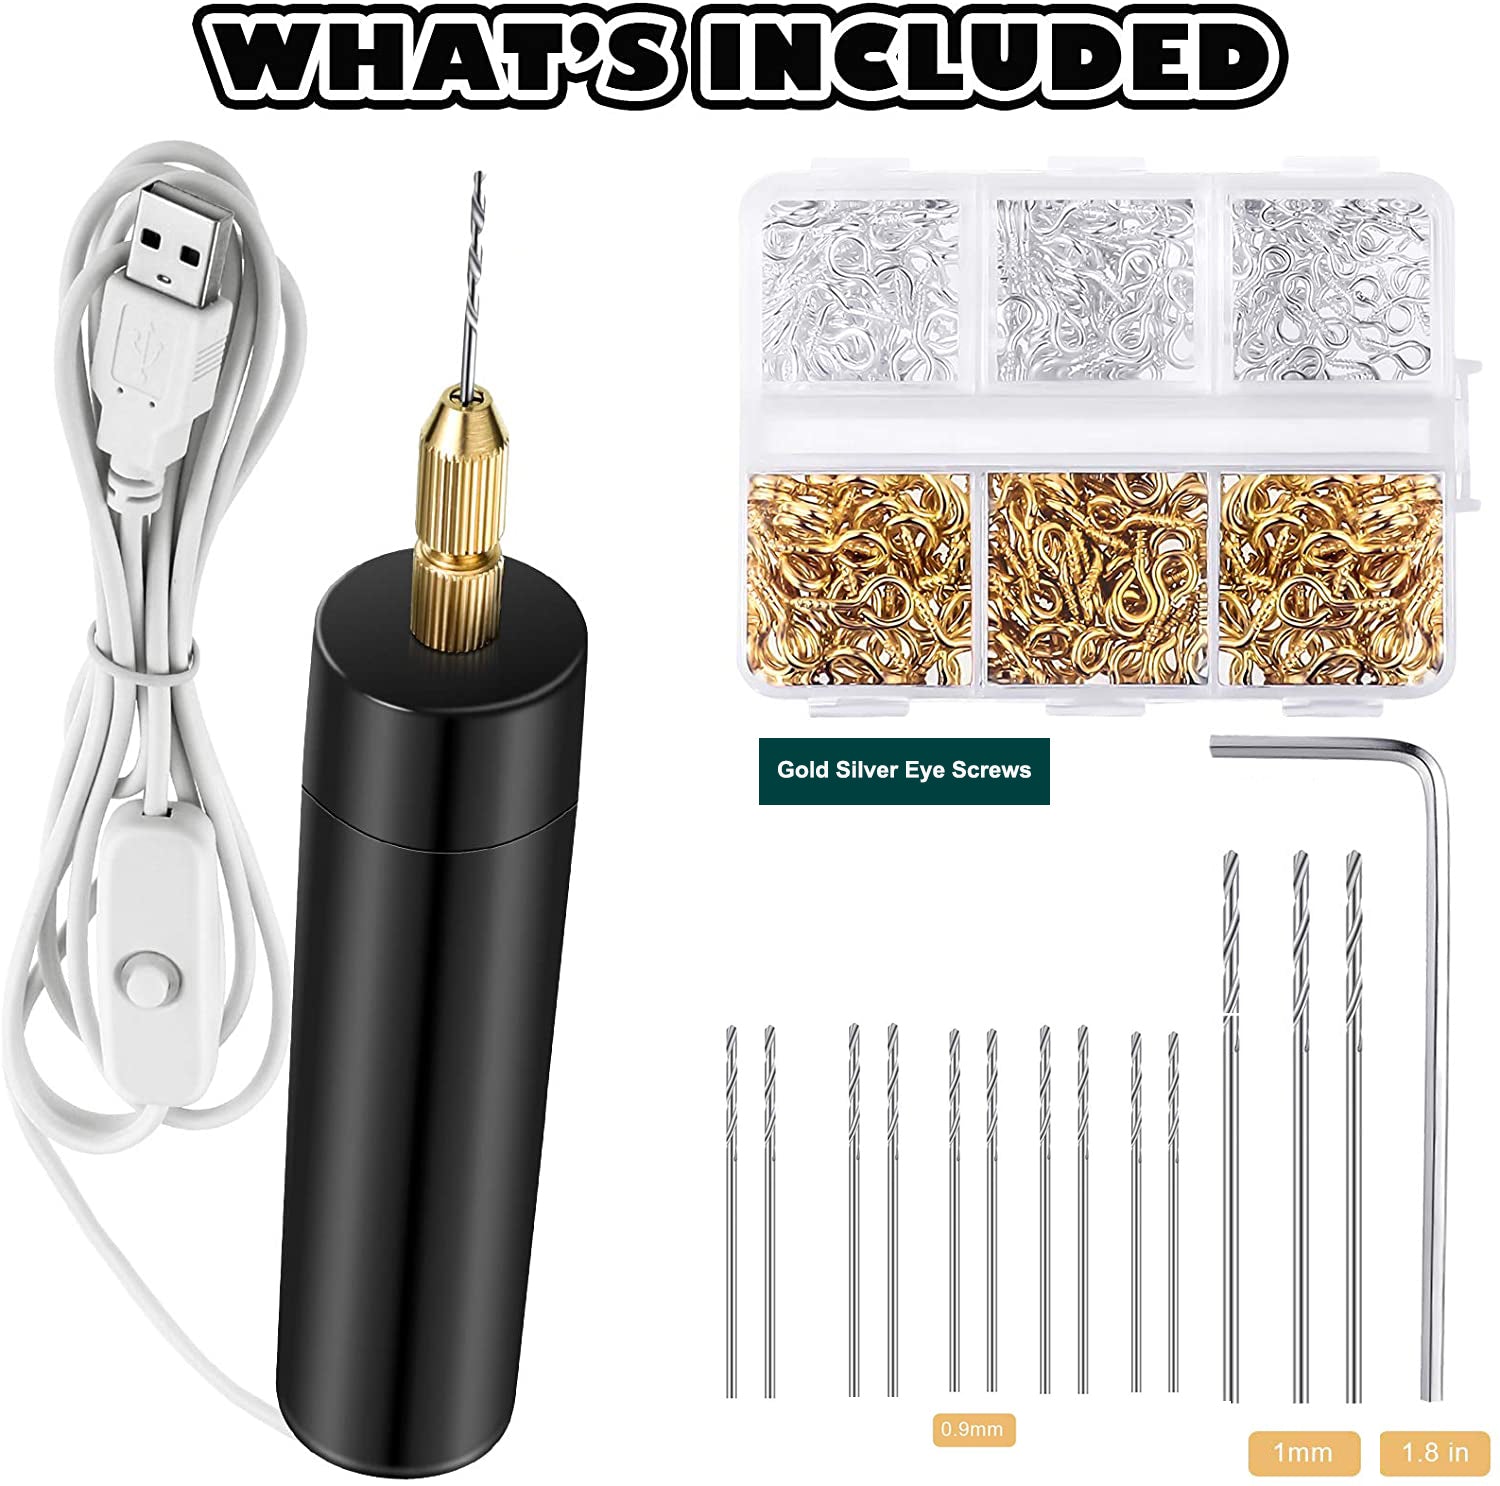 Electric Resin Drill Kit With 10 Bits For Art Jewelry Keychains Casting  Molds And Pin Vise From Camerashome, $25.45